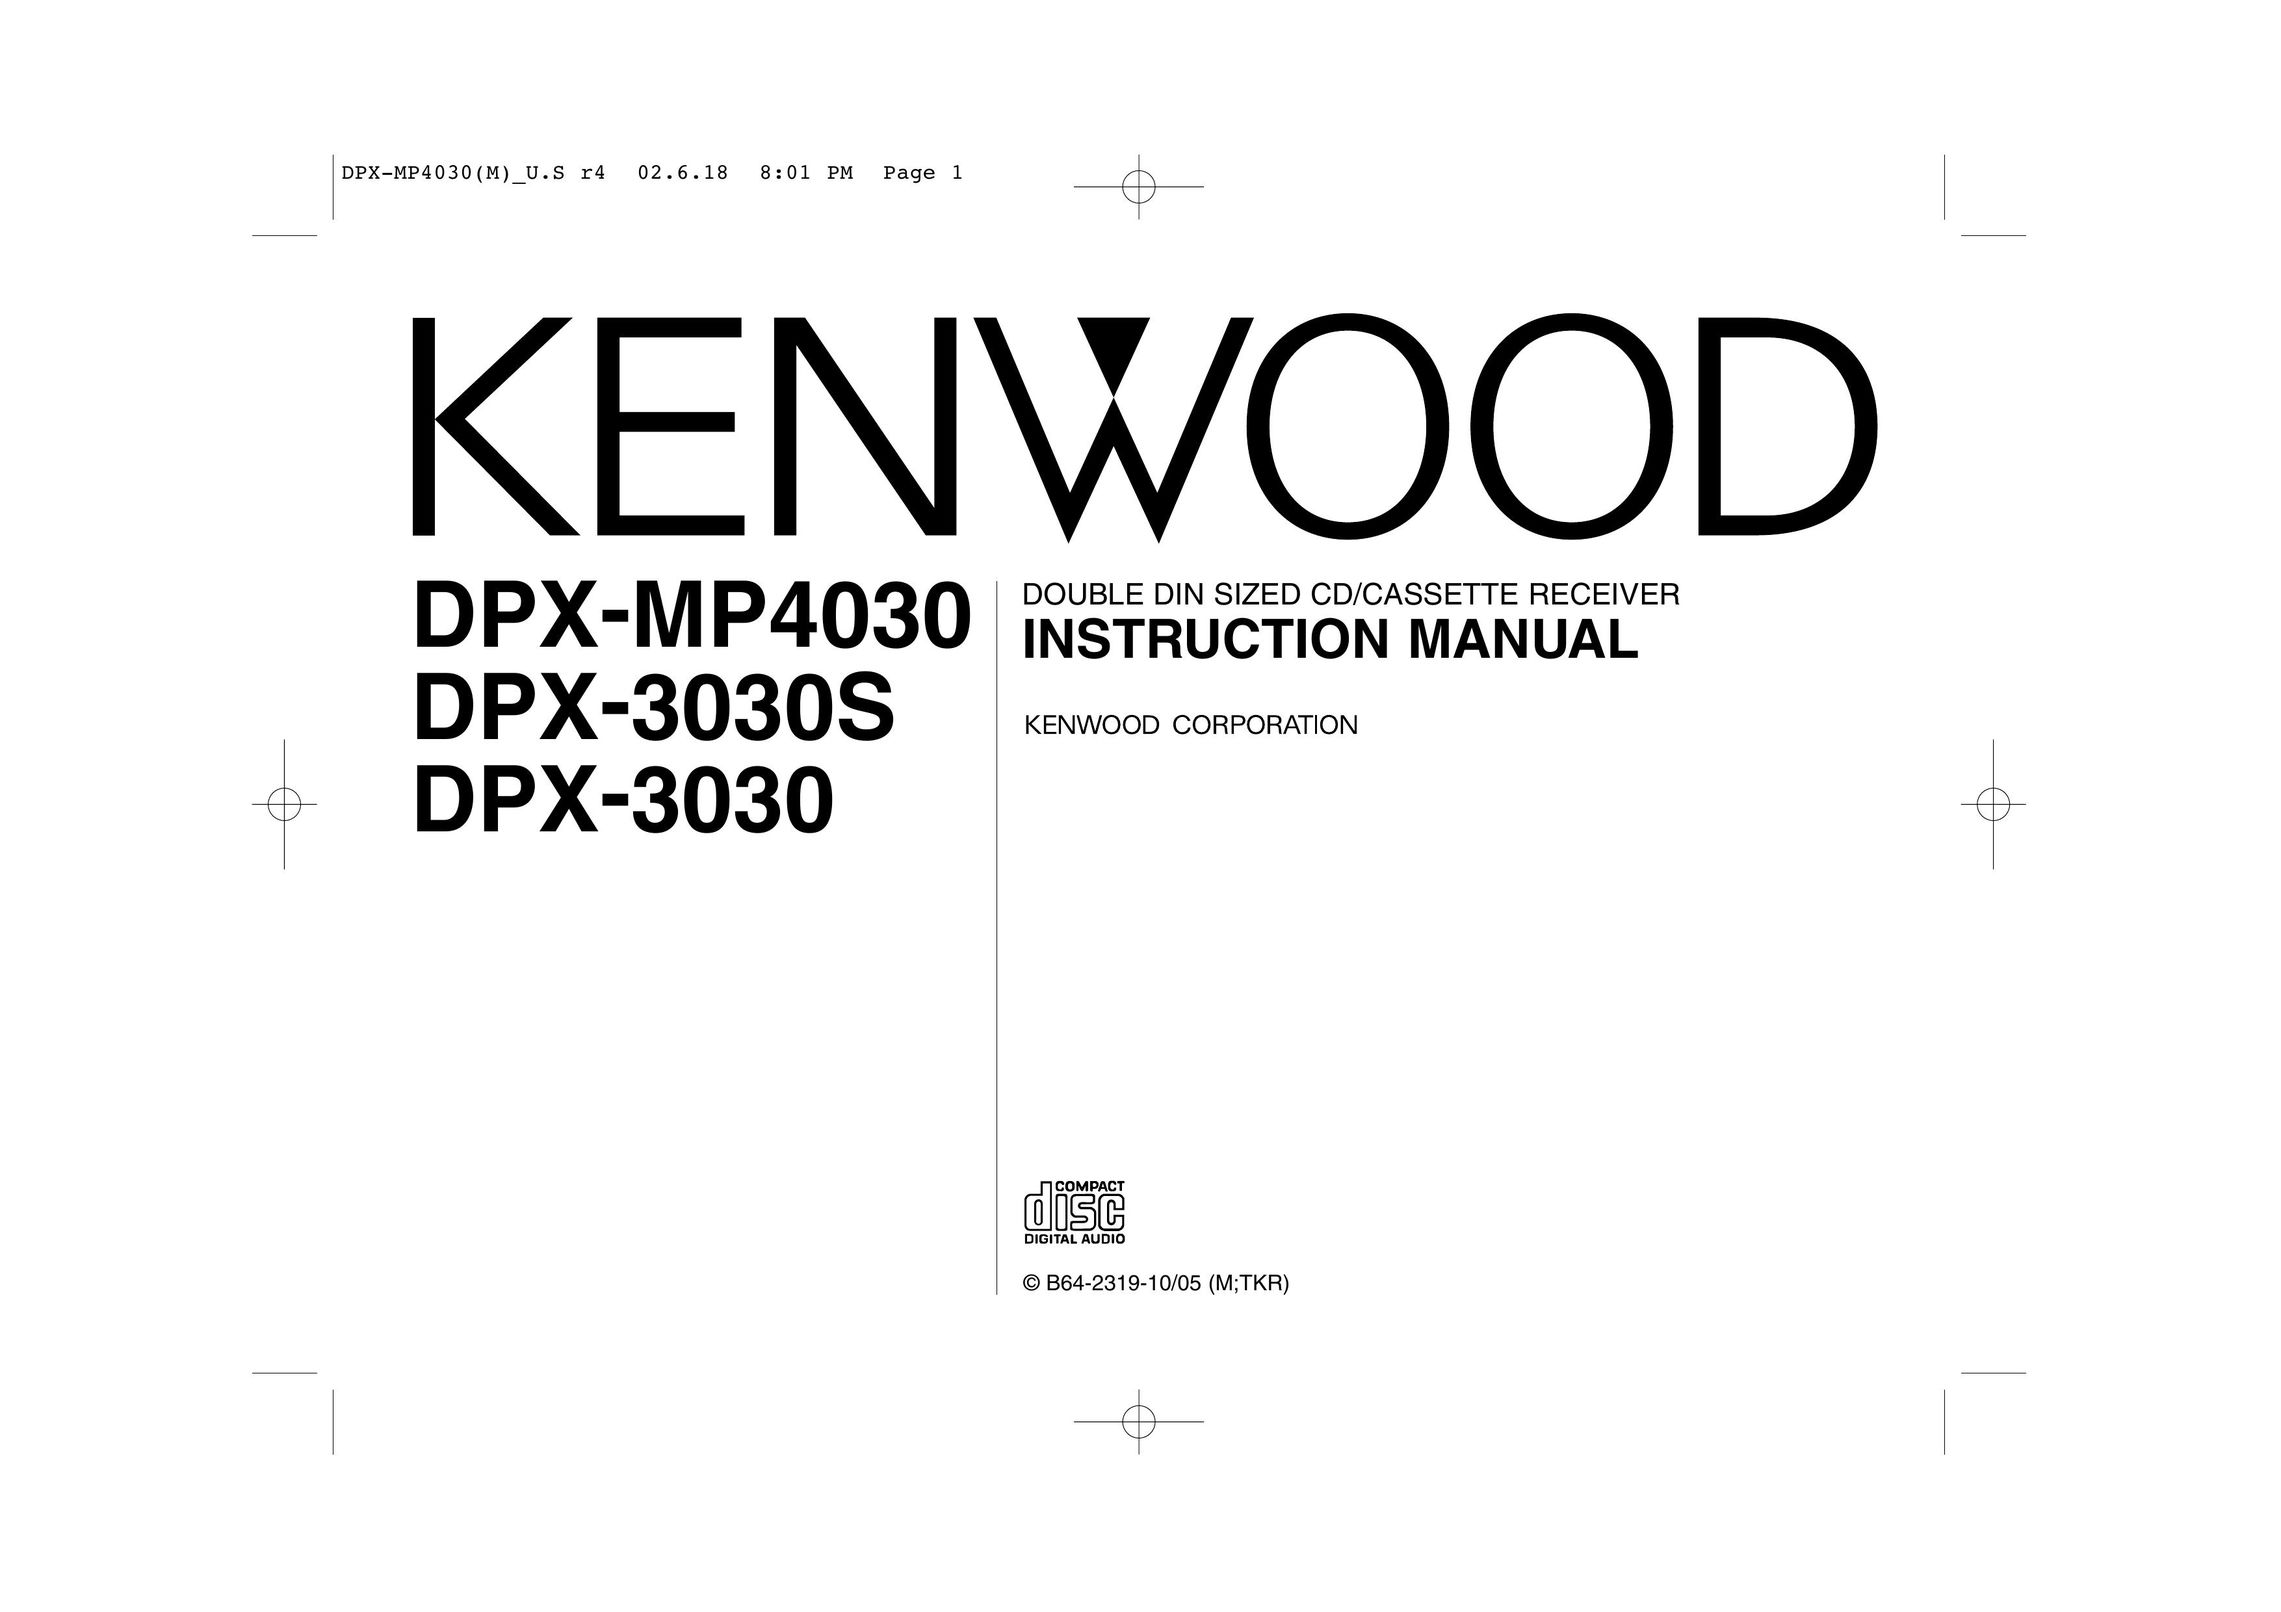 Kenwood DPX-3030 Car Stereo System User Manual